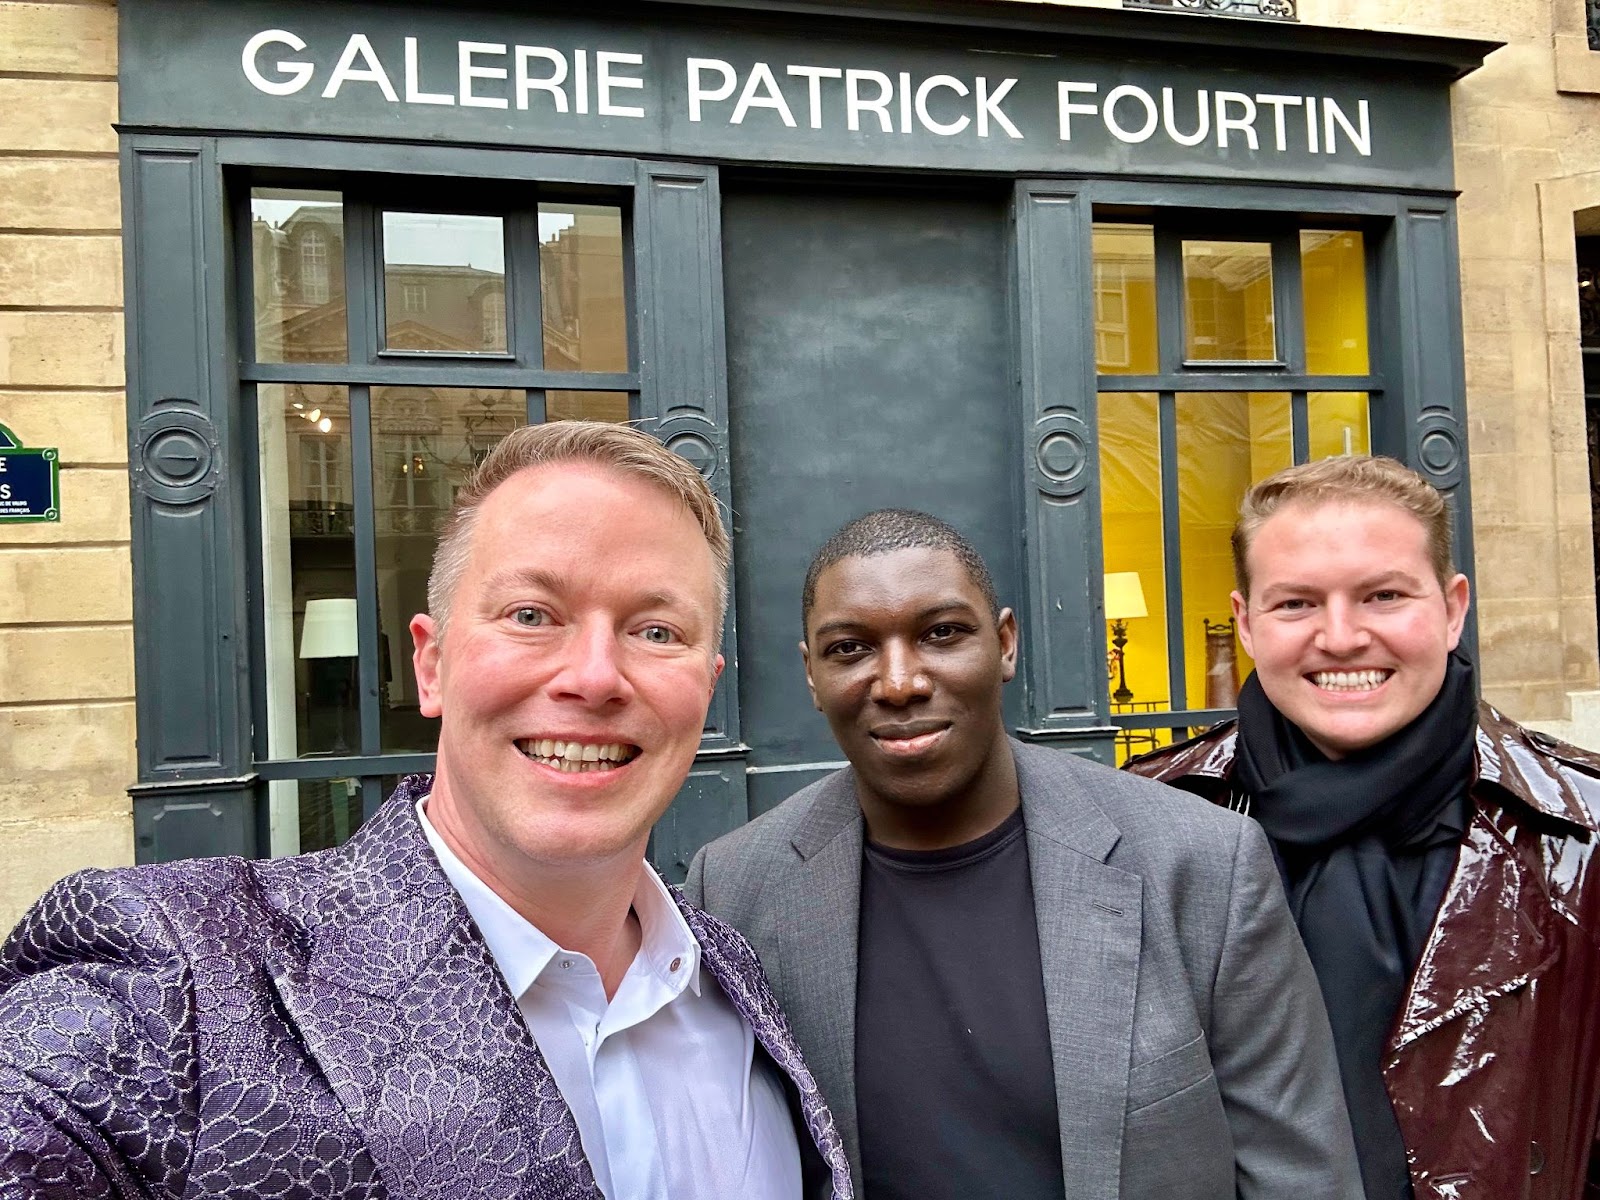 Curtis Sparrer, Mark Thomas, Brice Stanek in front of Galerie Patrick Fourtin